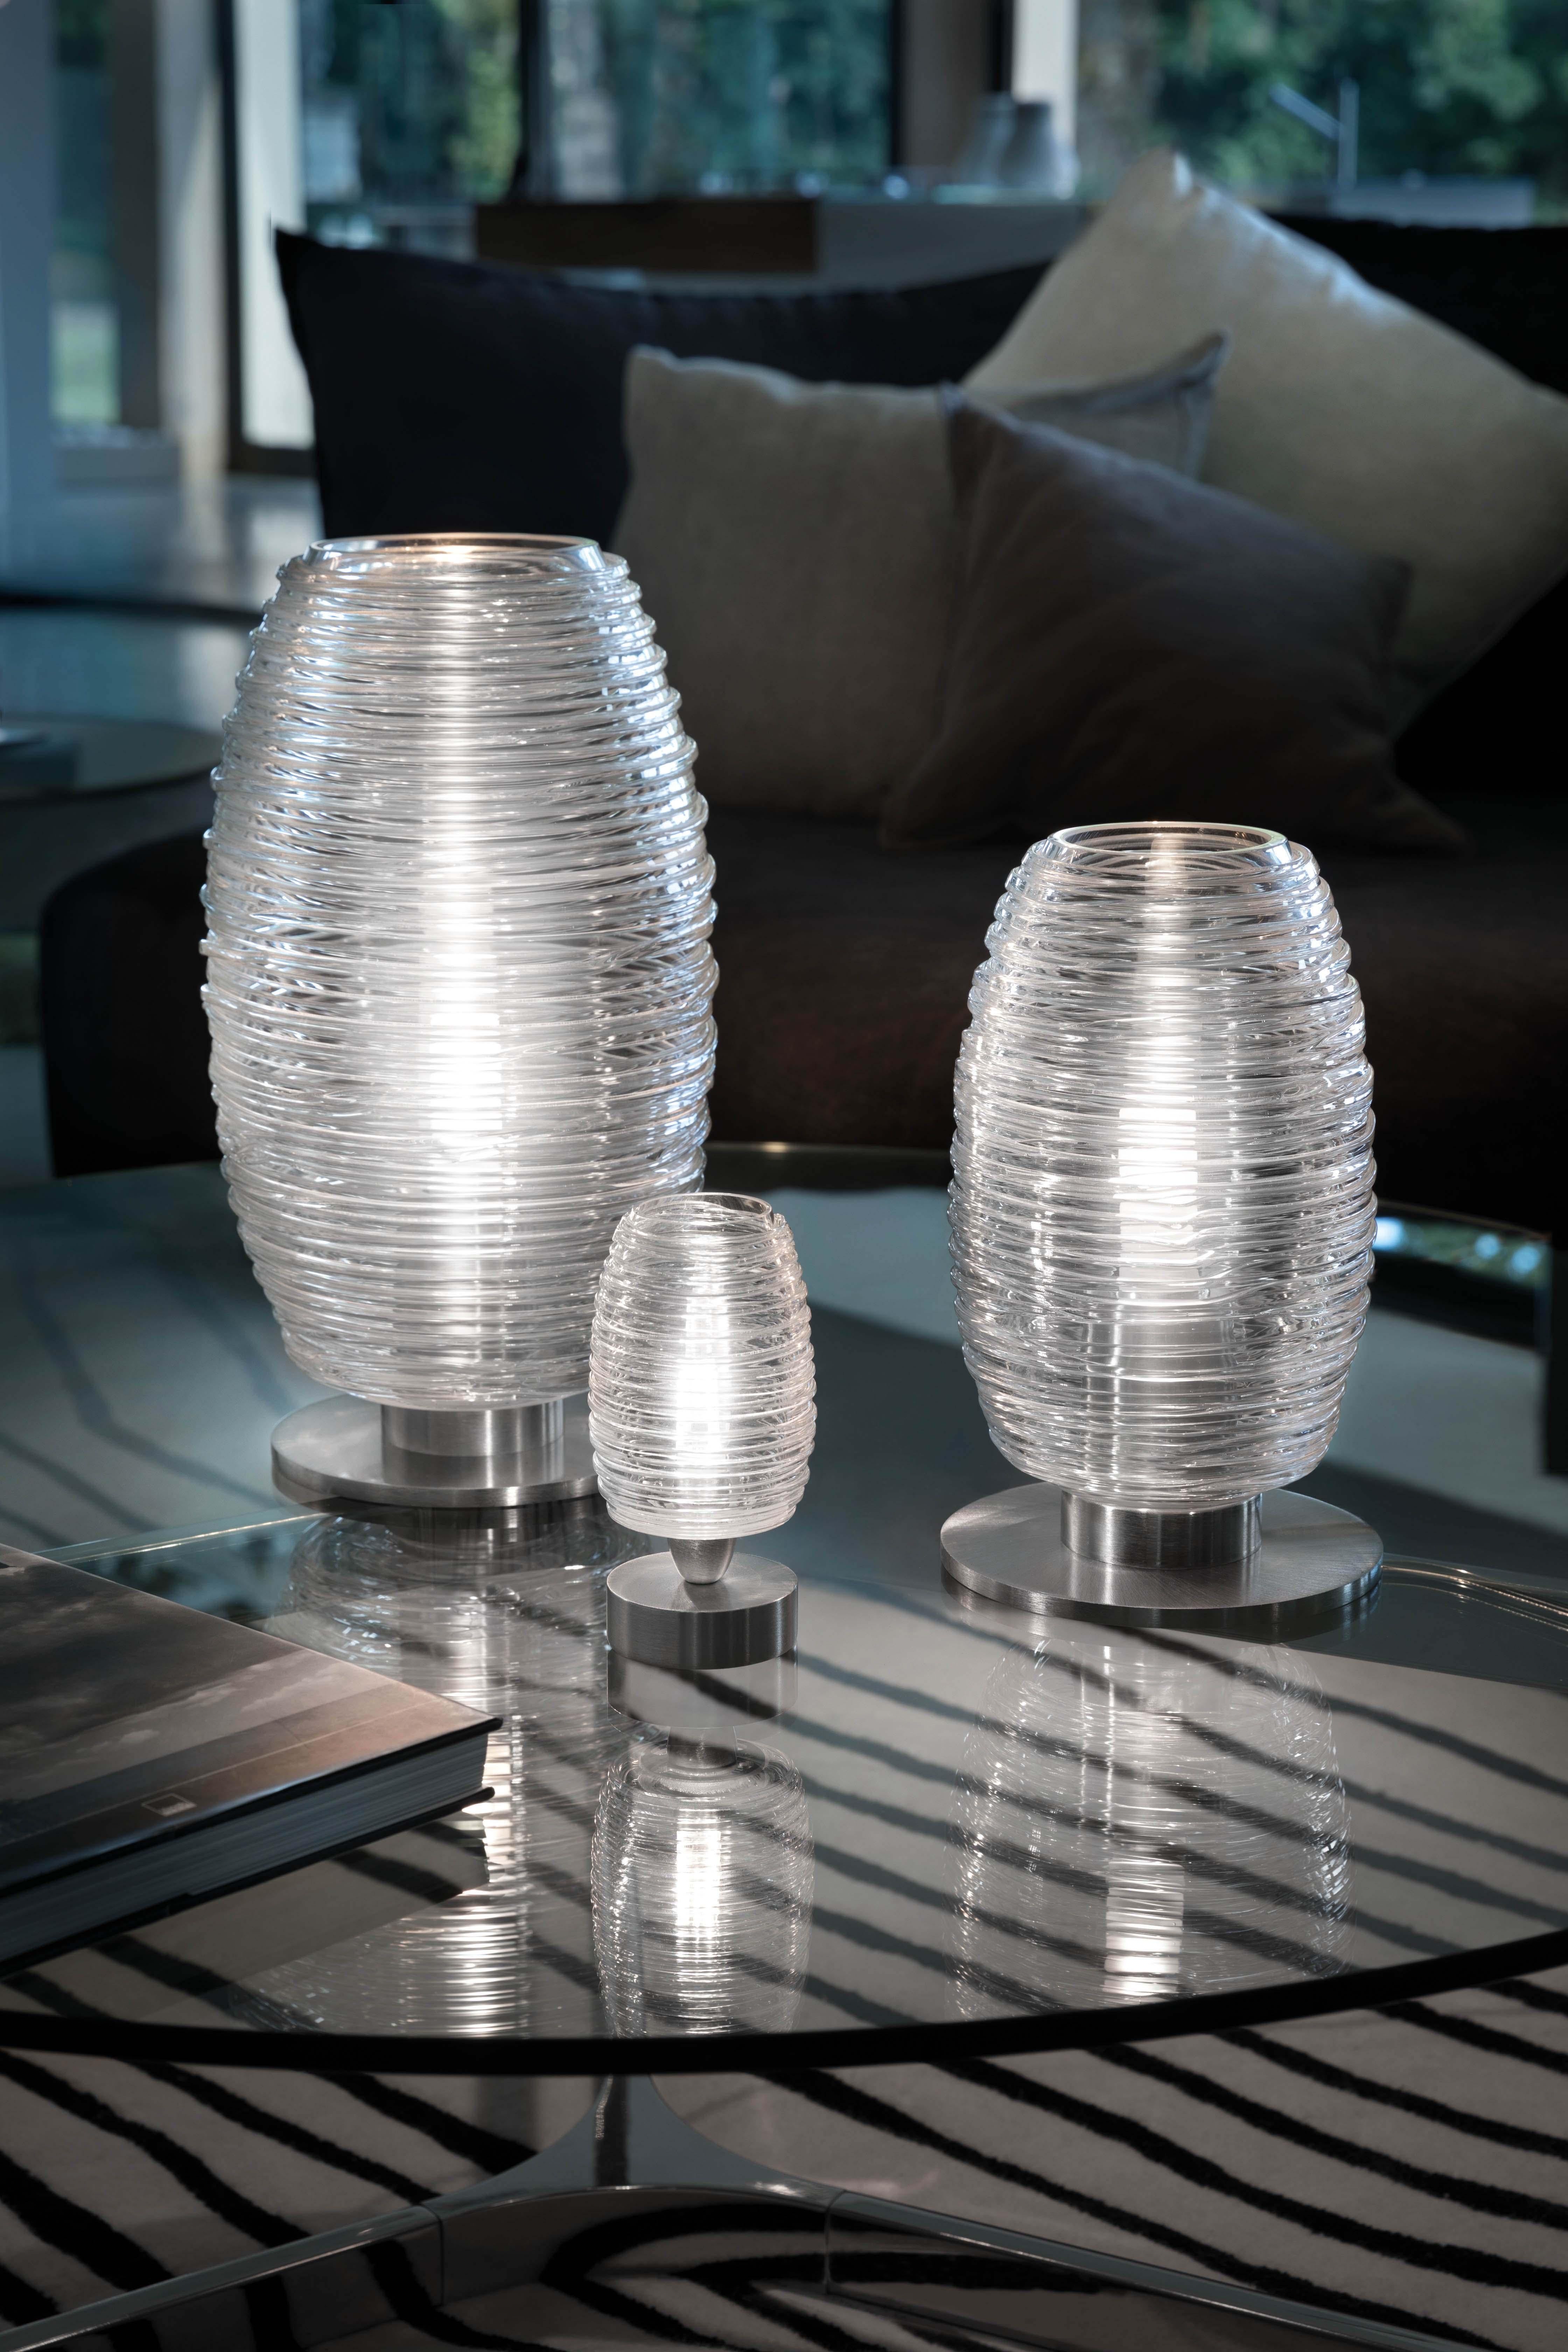 It is produced with the bozzolo technique, which consists in applying threads of molten glass that create an organic texture. Due to its versatility, it is one of our most successful series which has been developed and extended during the years with